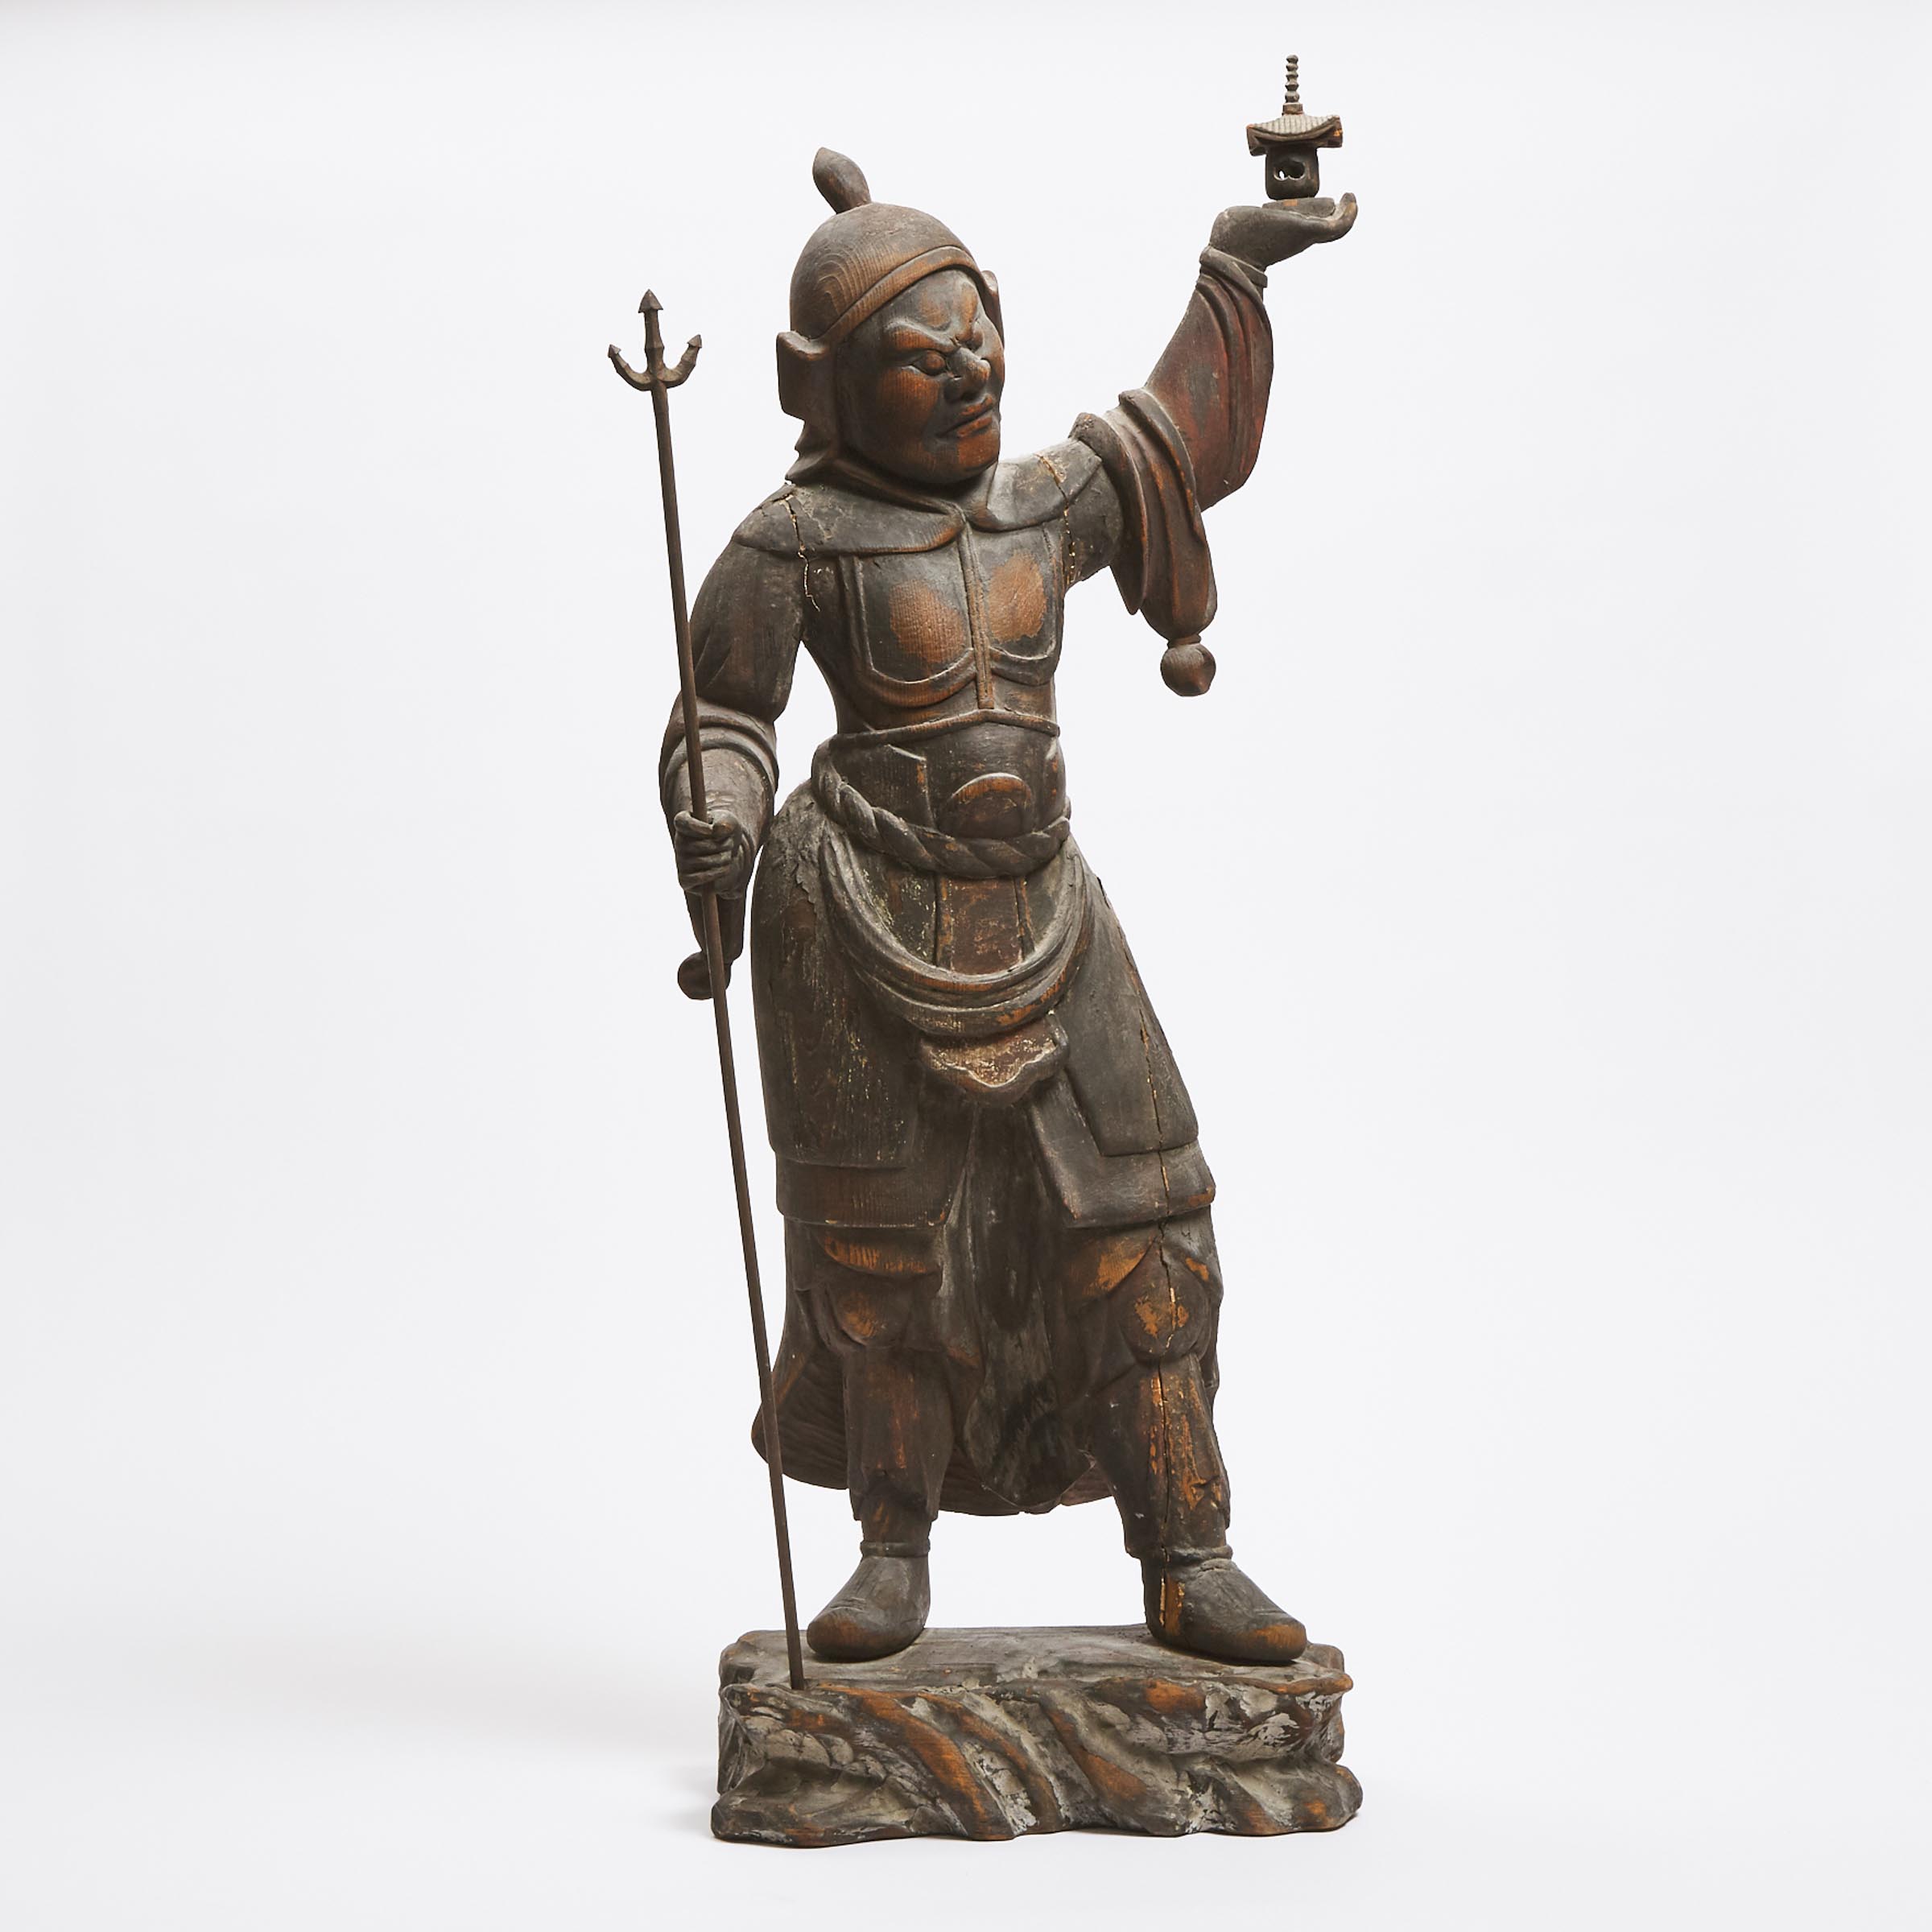 A Large Lacquered Wood Figure of